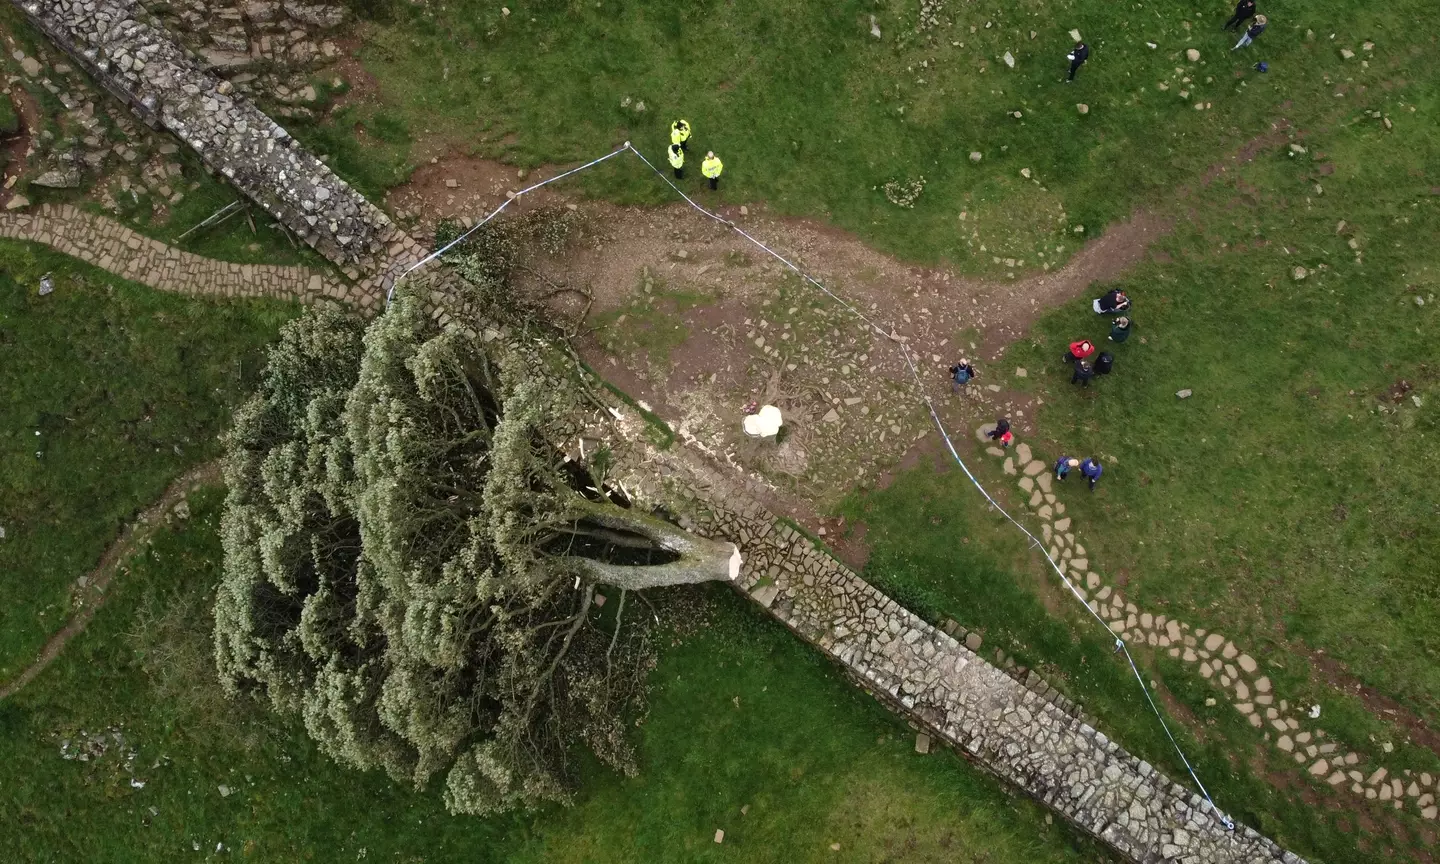 Two more people have been arrested and bailed in connection with the felling of the Sycamore Gap tree.